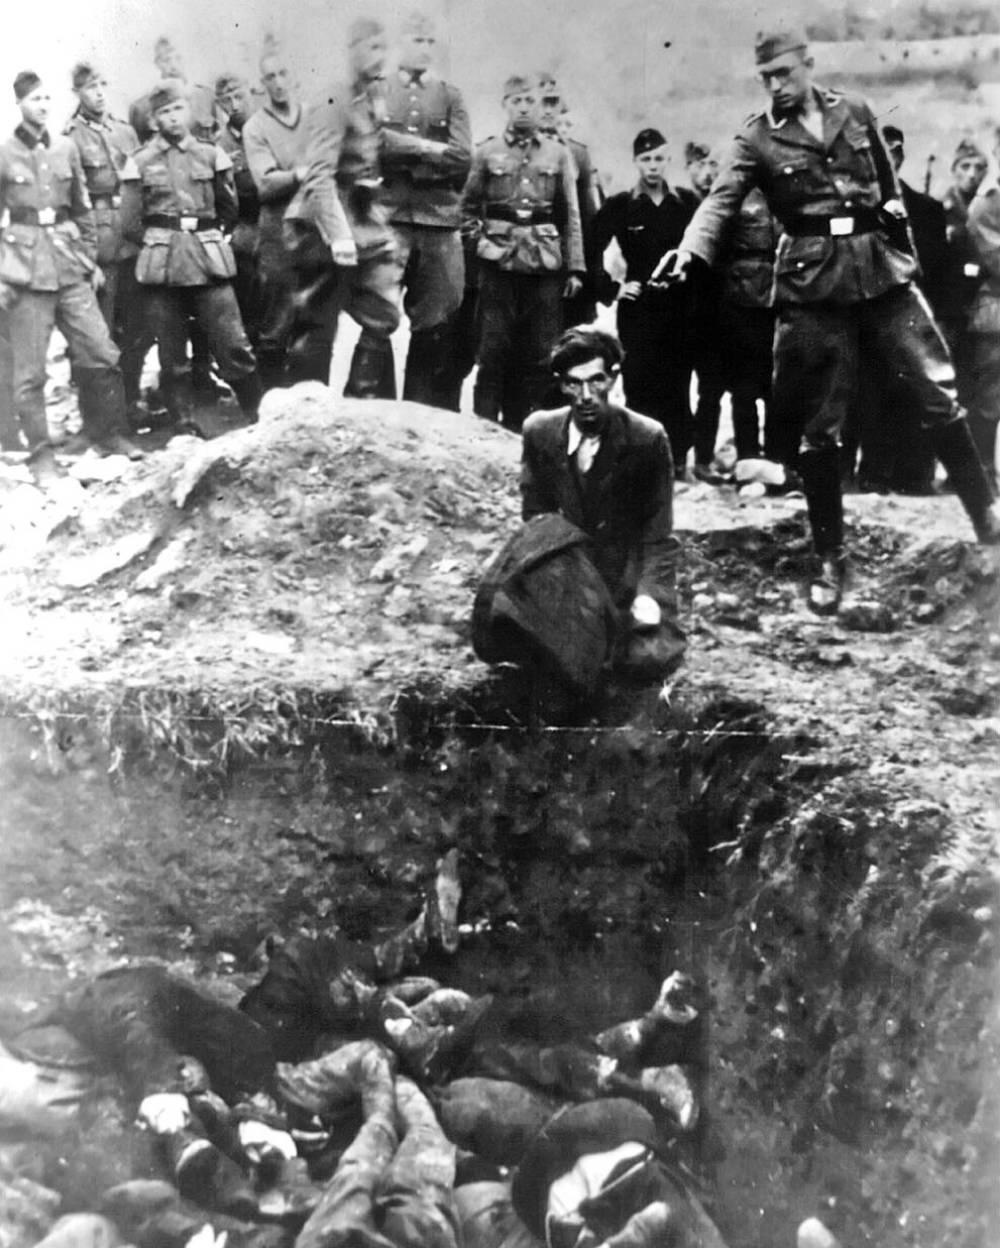 In this iconic World War 2 photograph, a member of Einsatzgruppe D – a Nazi paramilitary group – is about to shoot a Jewish man kneeling before a filled mass grave in Vinnitsa, Ukraine, in 1942. All 28,000 Jews from Vinnitsa and its surrounding areas were massacred by German forces.